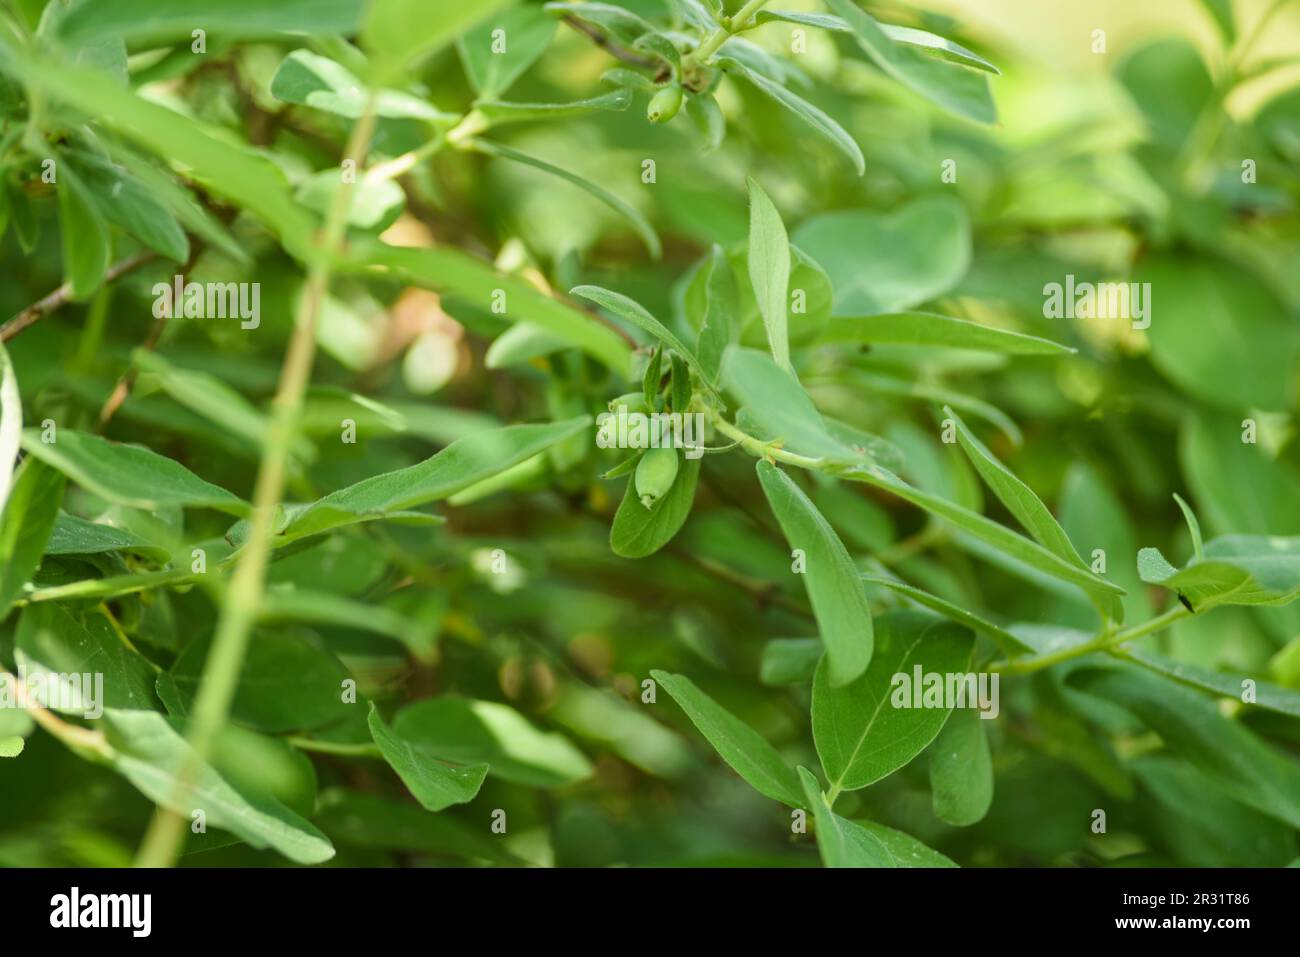 Kamchatka berry growing in the garden in spring with green berries. Stock Photo